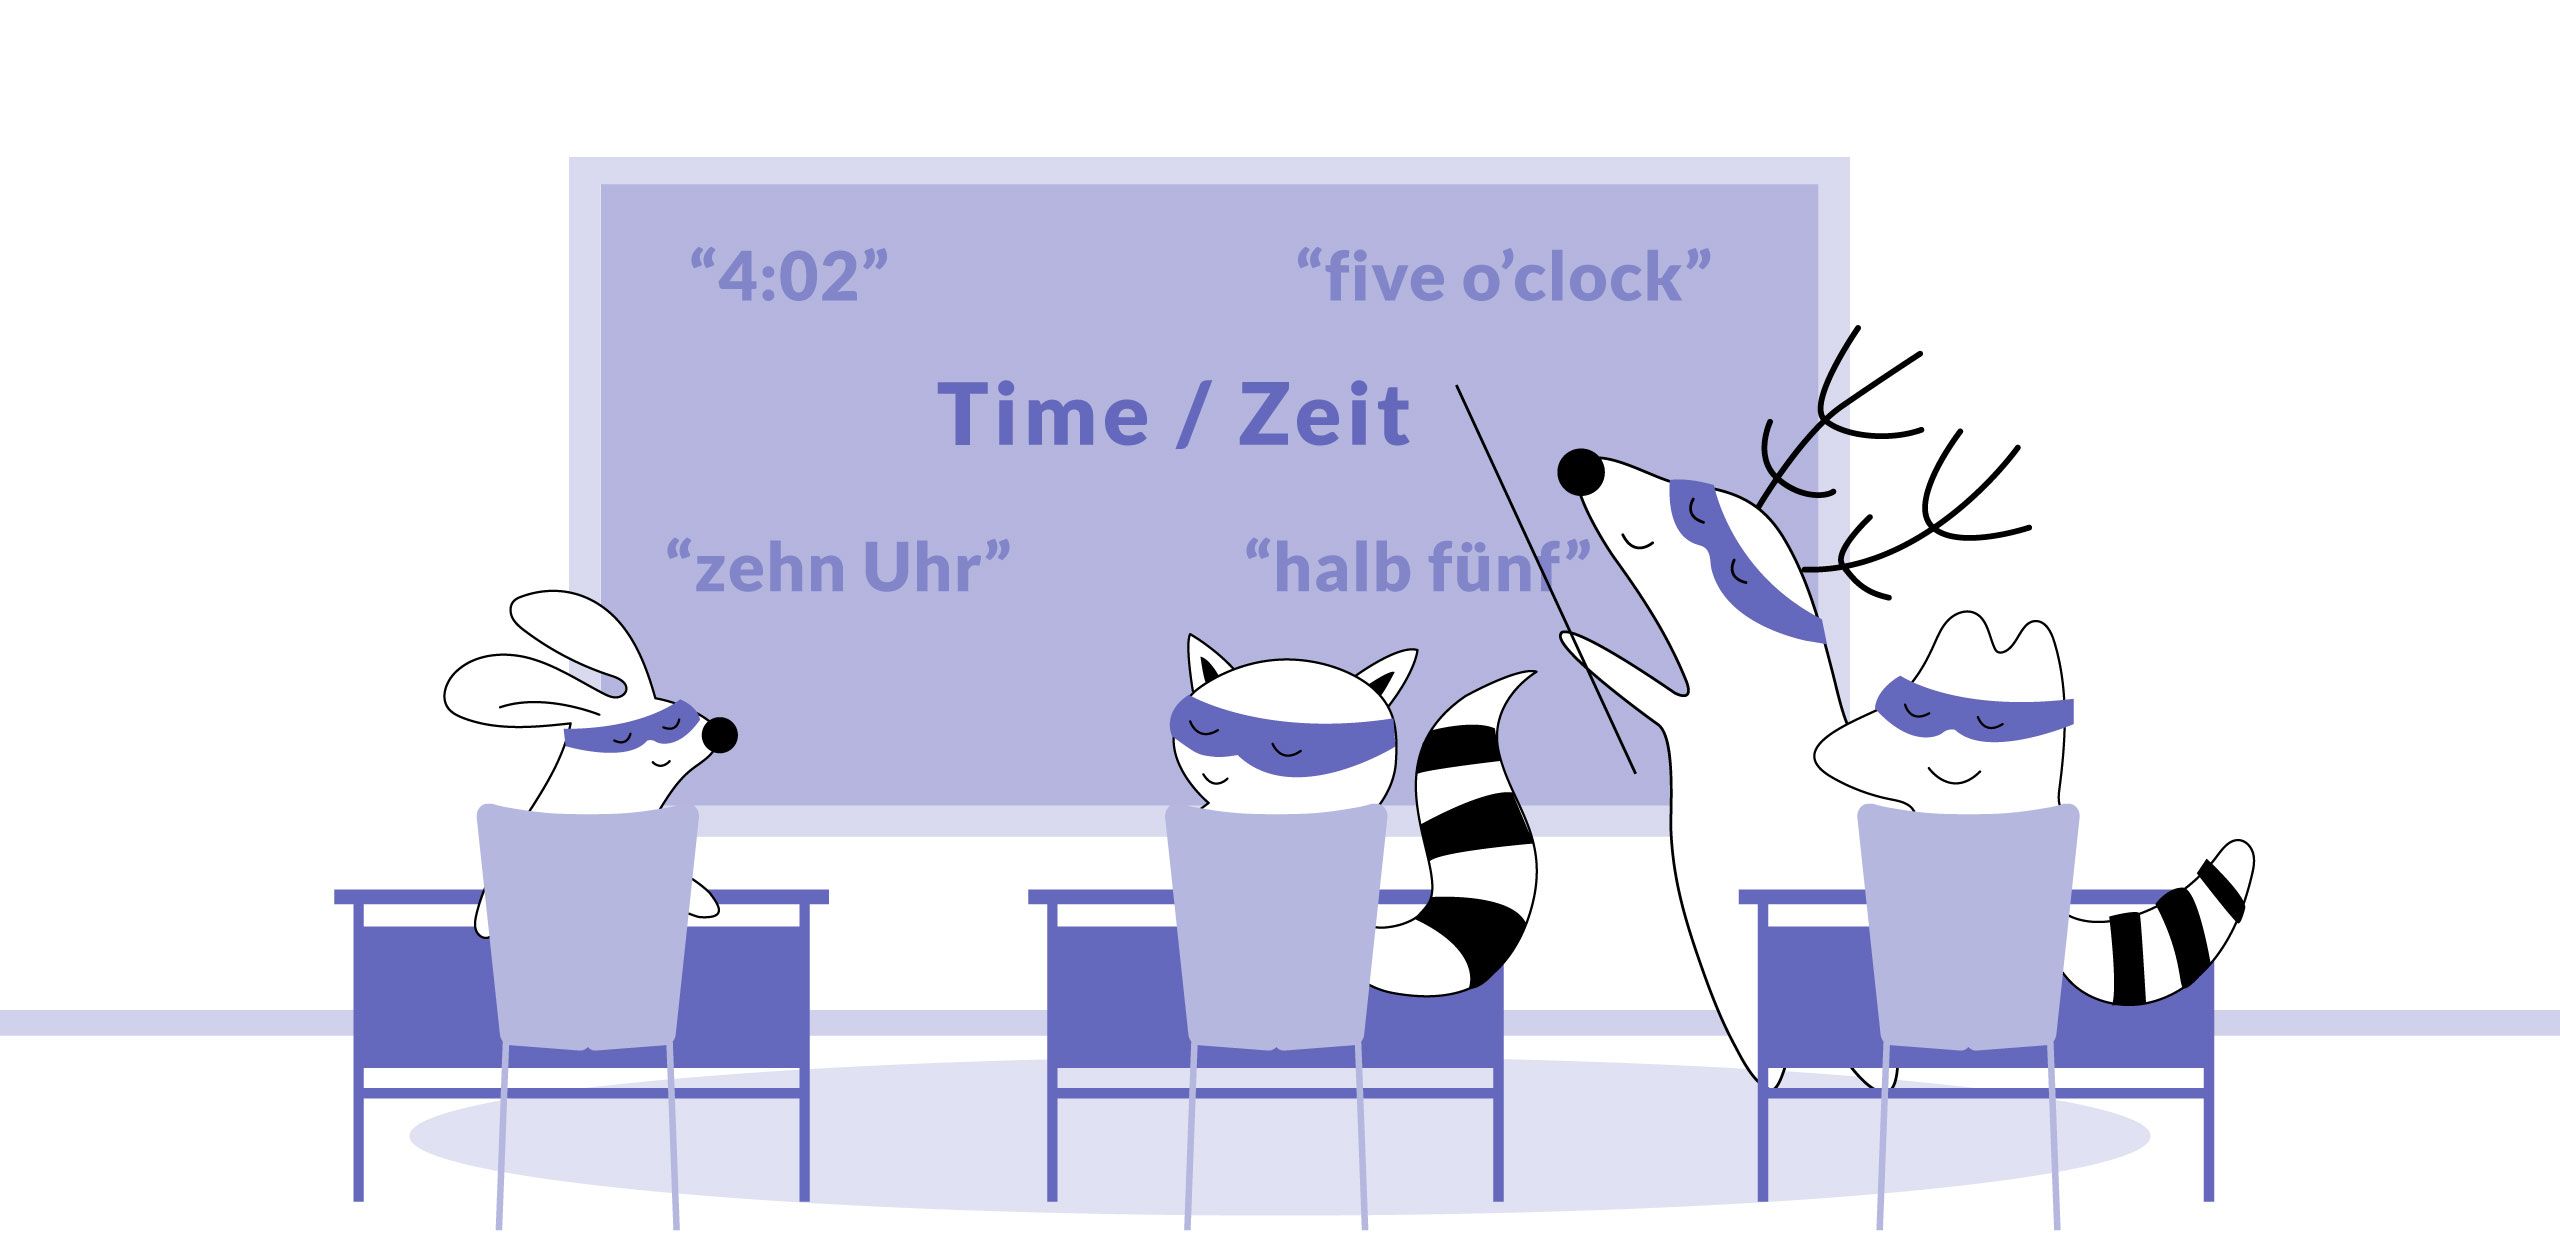 How to tell time in German